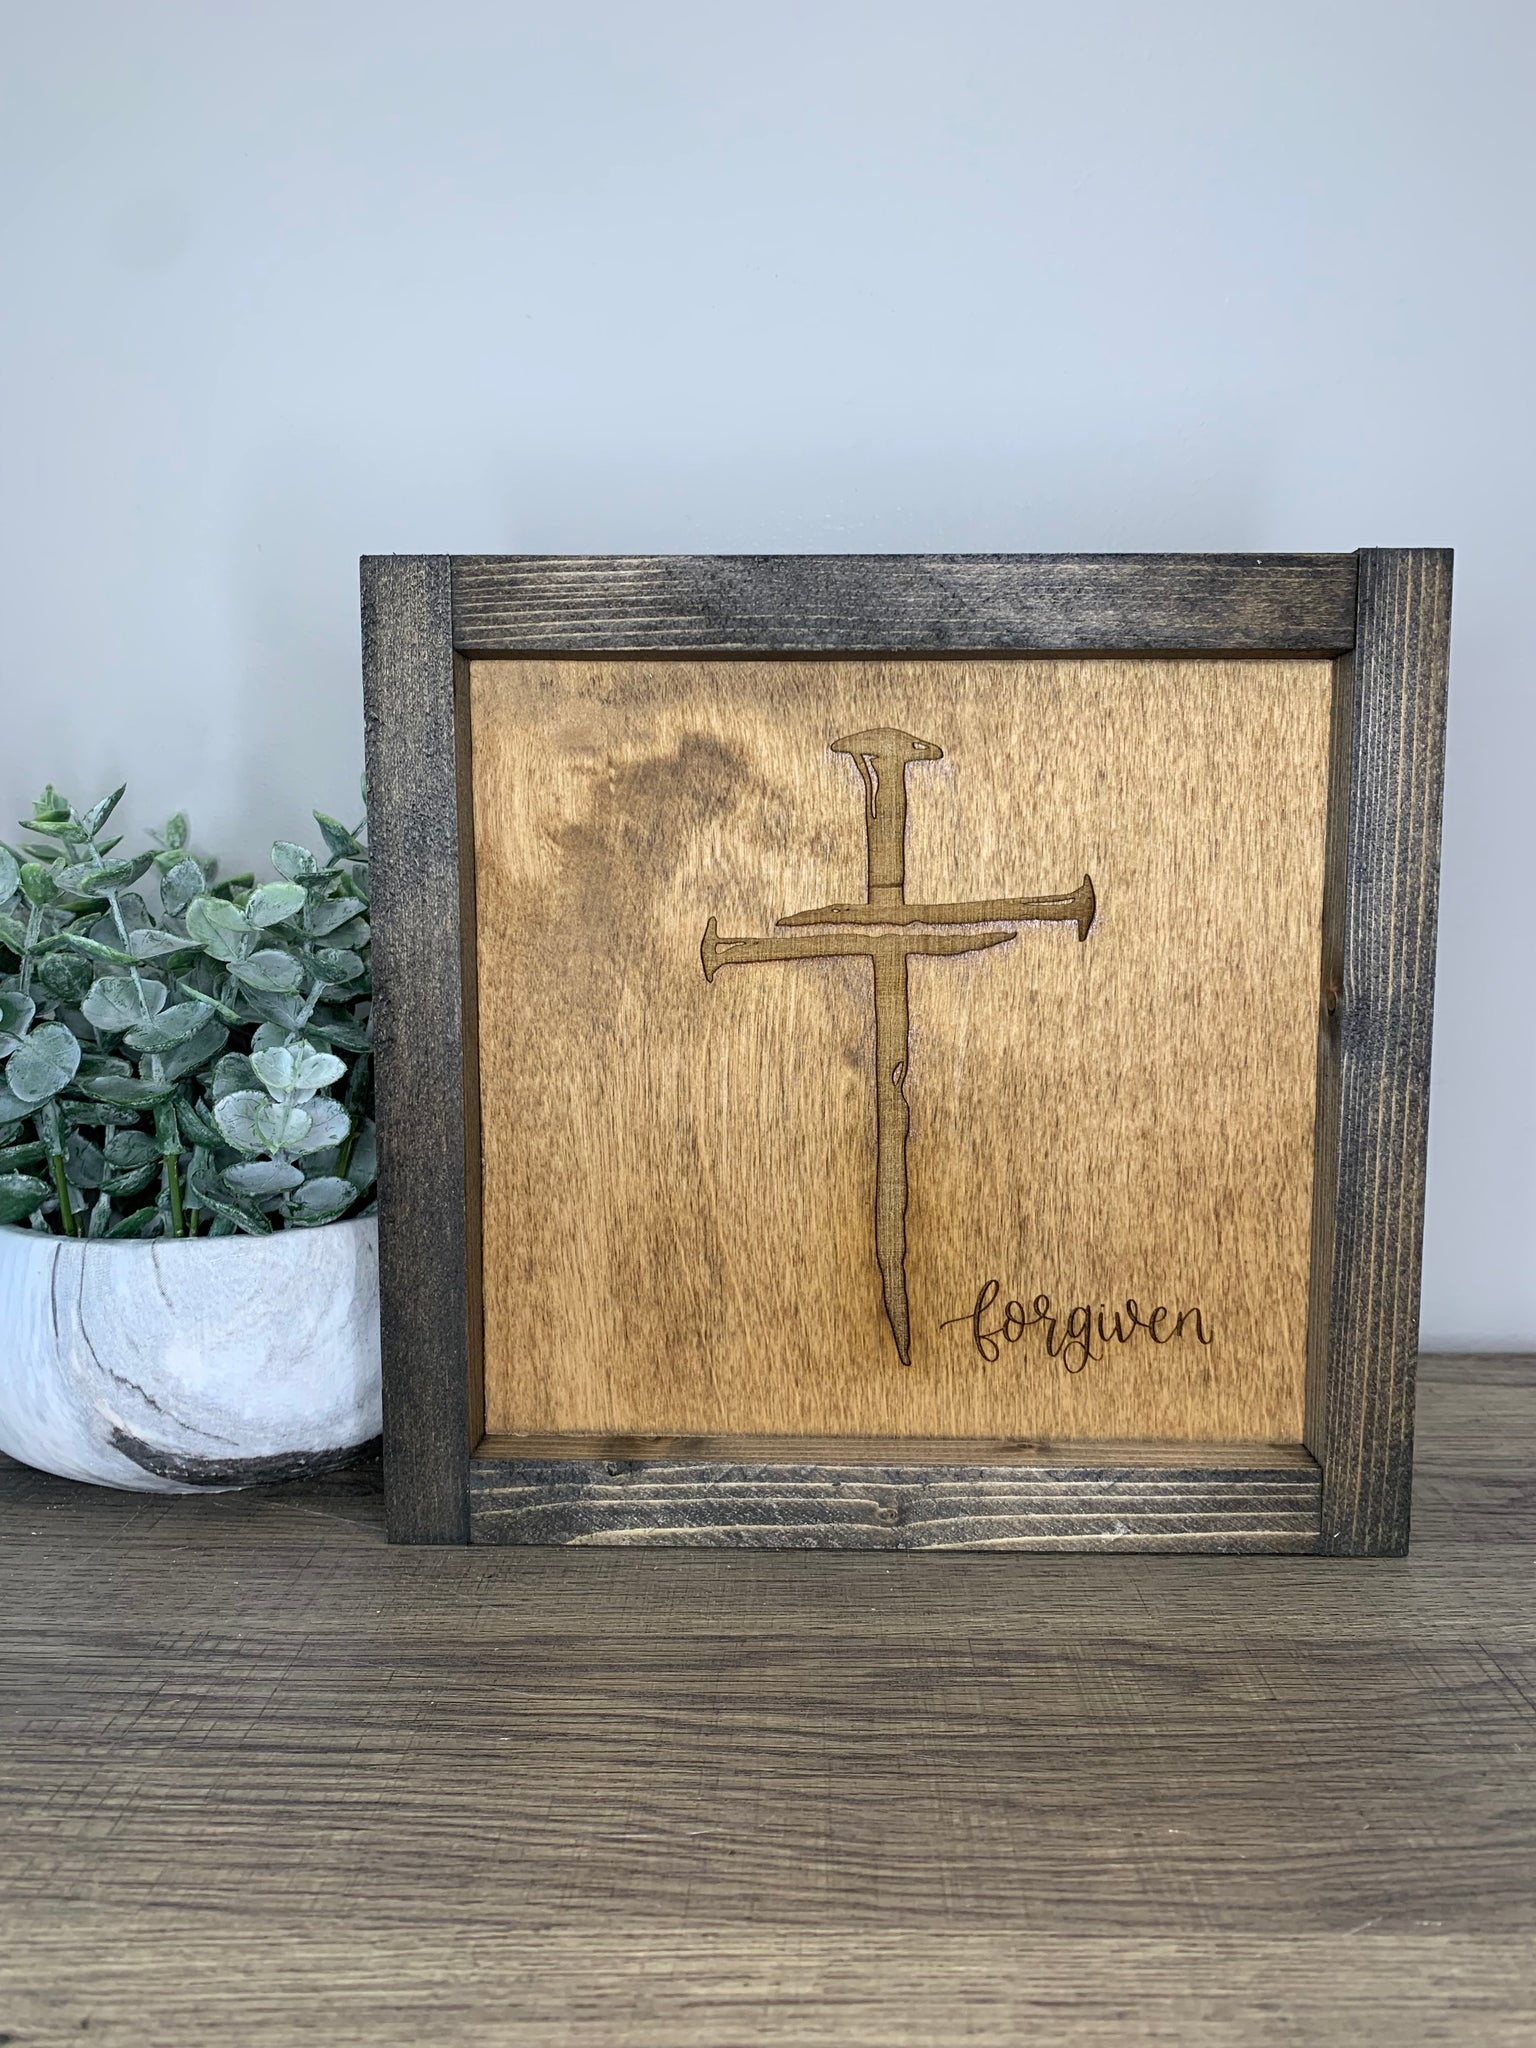 Forgiven Cross Sign With Nails